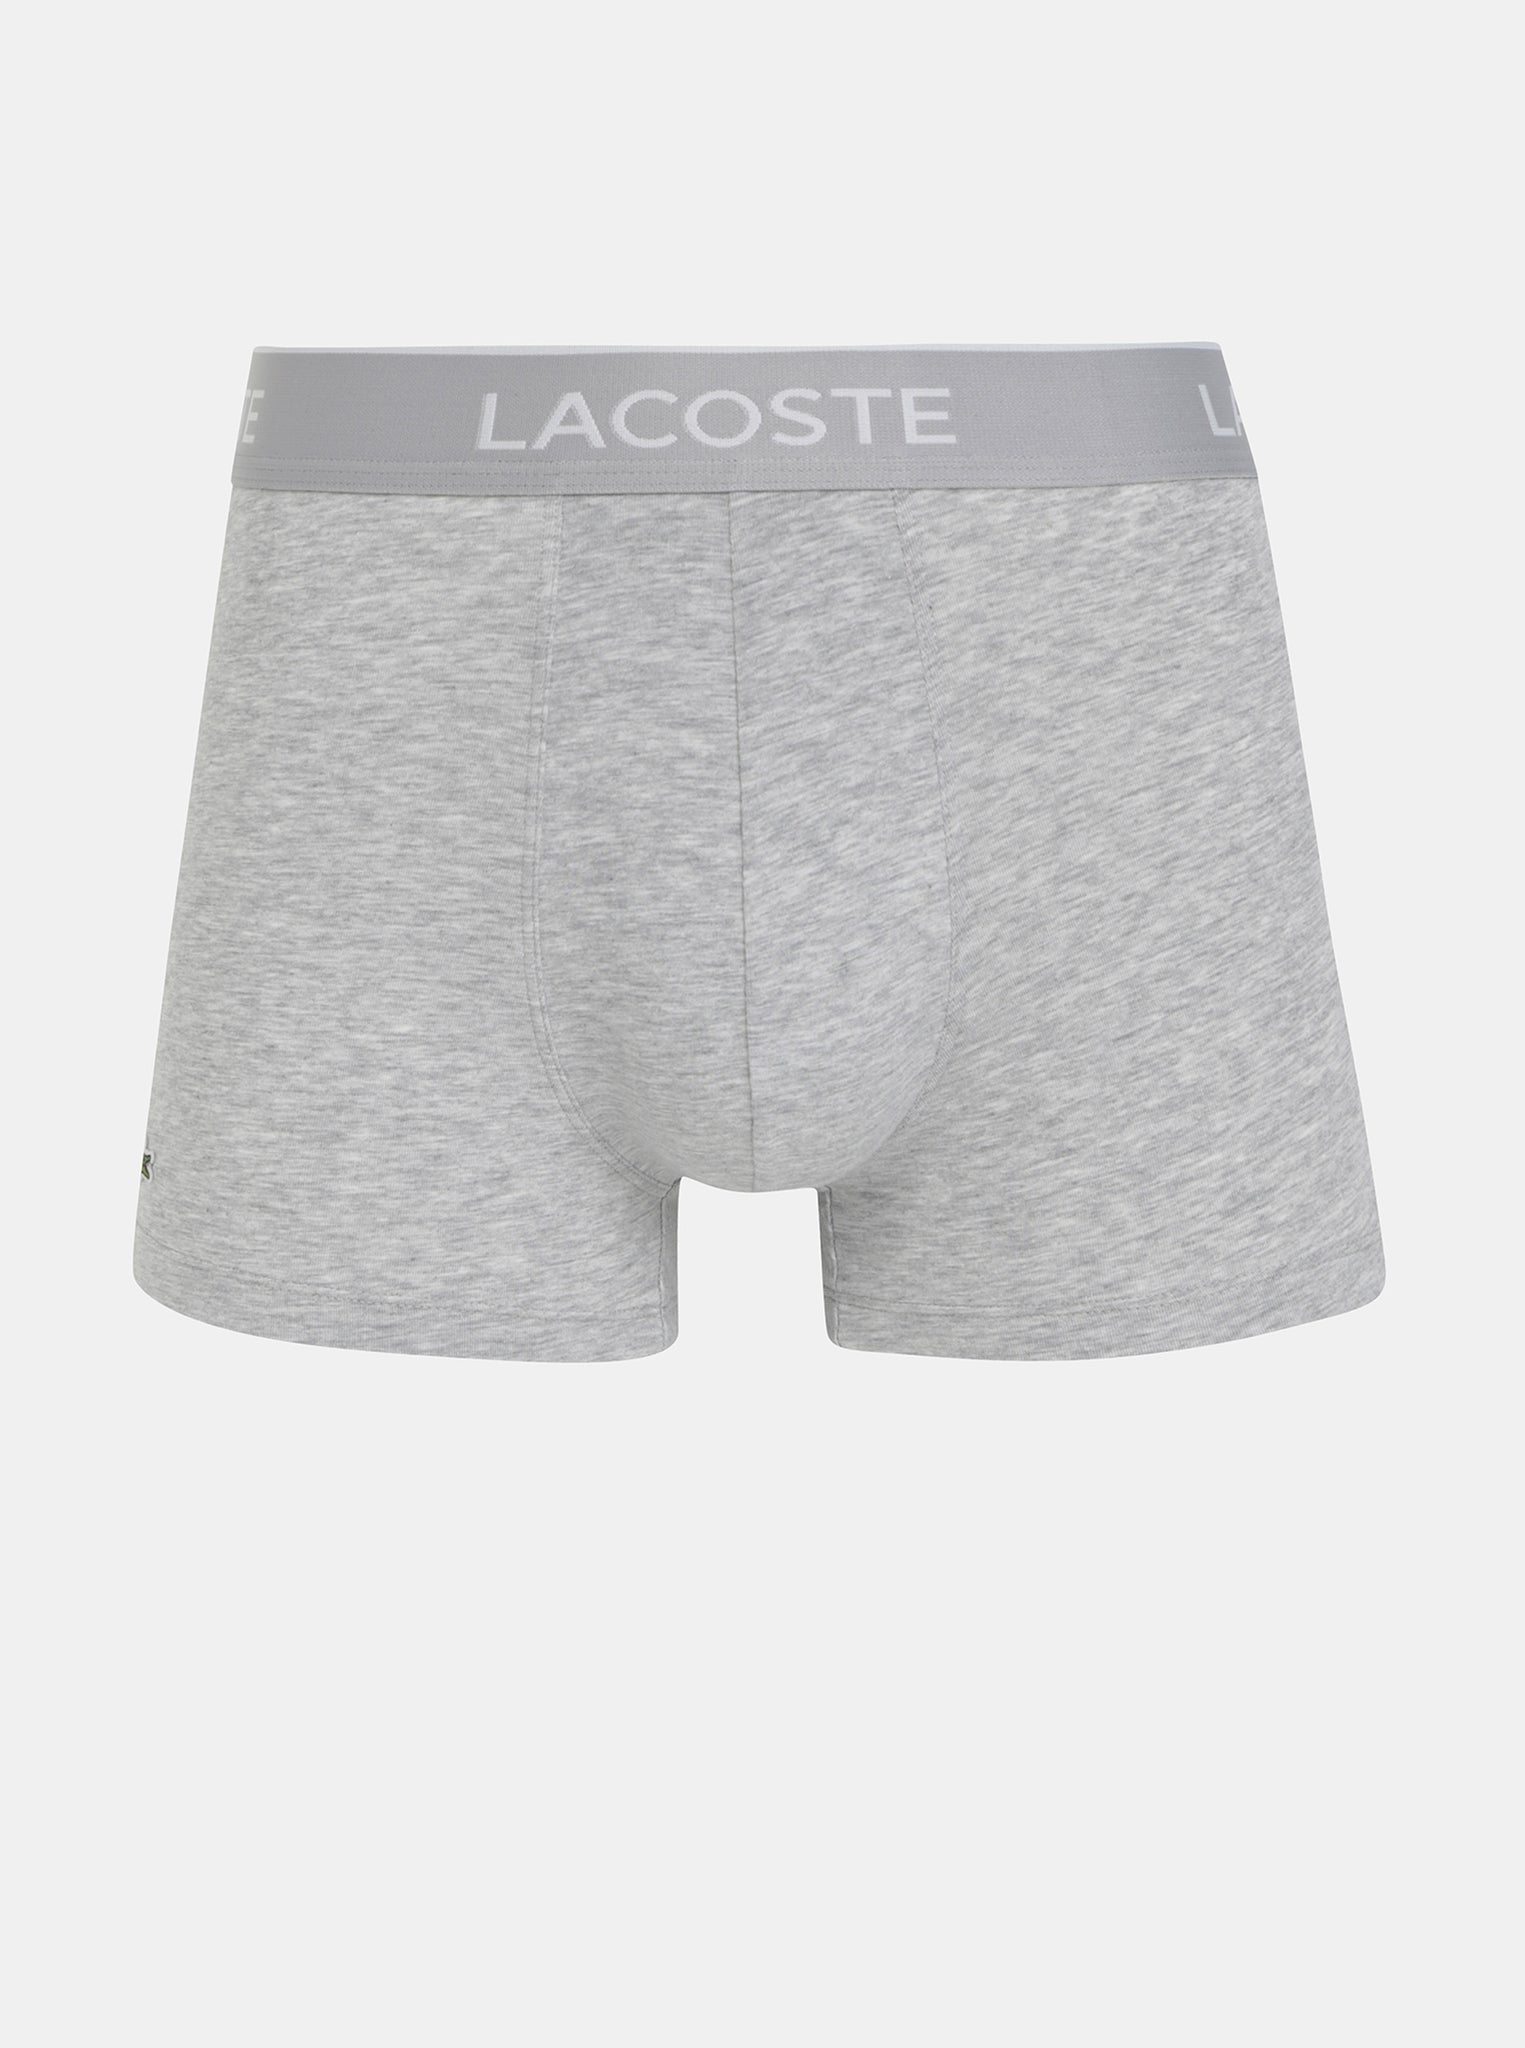 Lacoste Men's Trunk (Pack of 3) Briefs, Boxers, Shorts